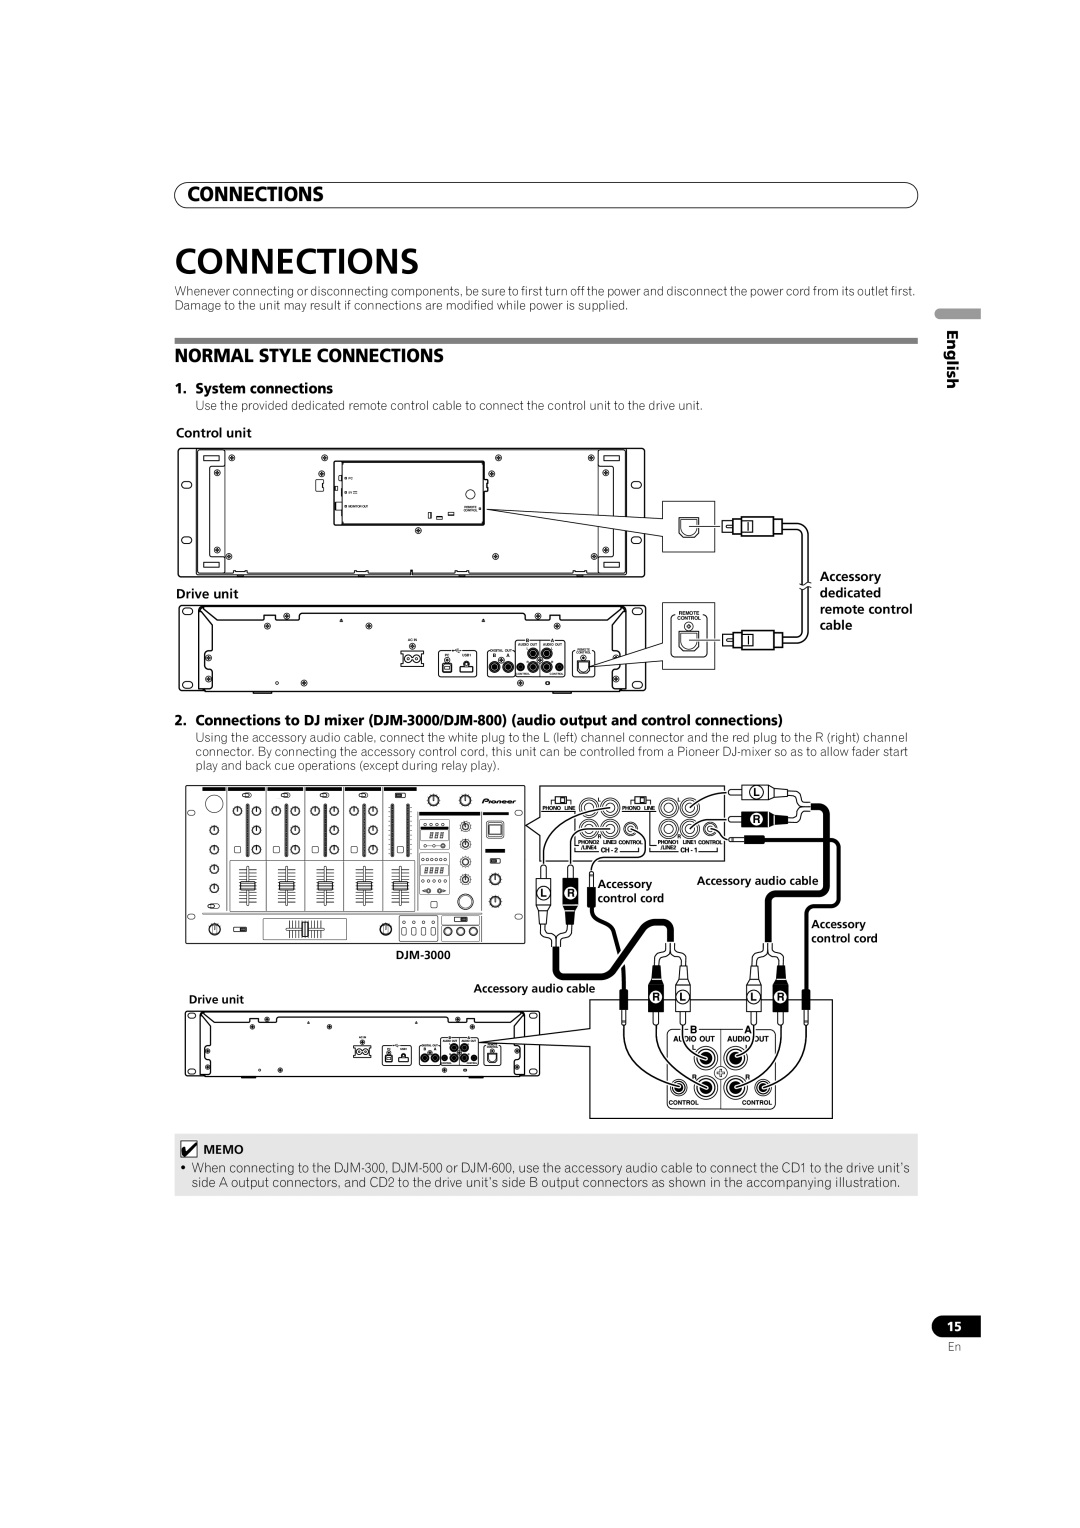 Pioneer MEP-7000 Normal Style Connections, English, Control unit, Accessory, Drive unit, dedicated, cable 